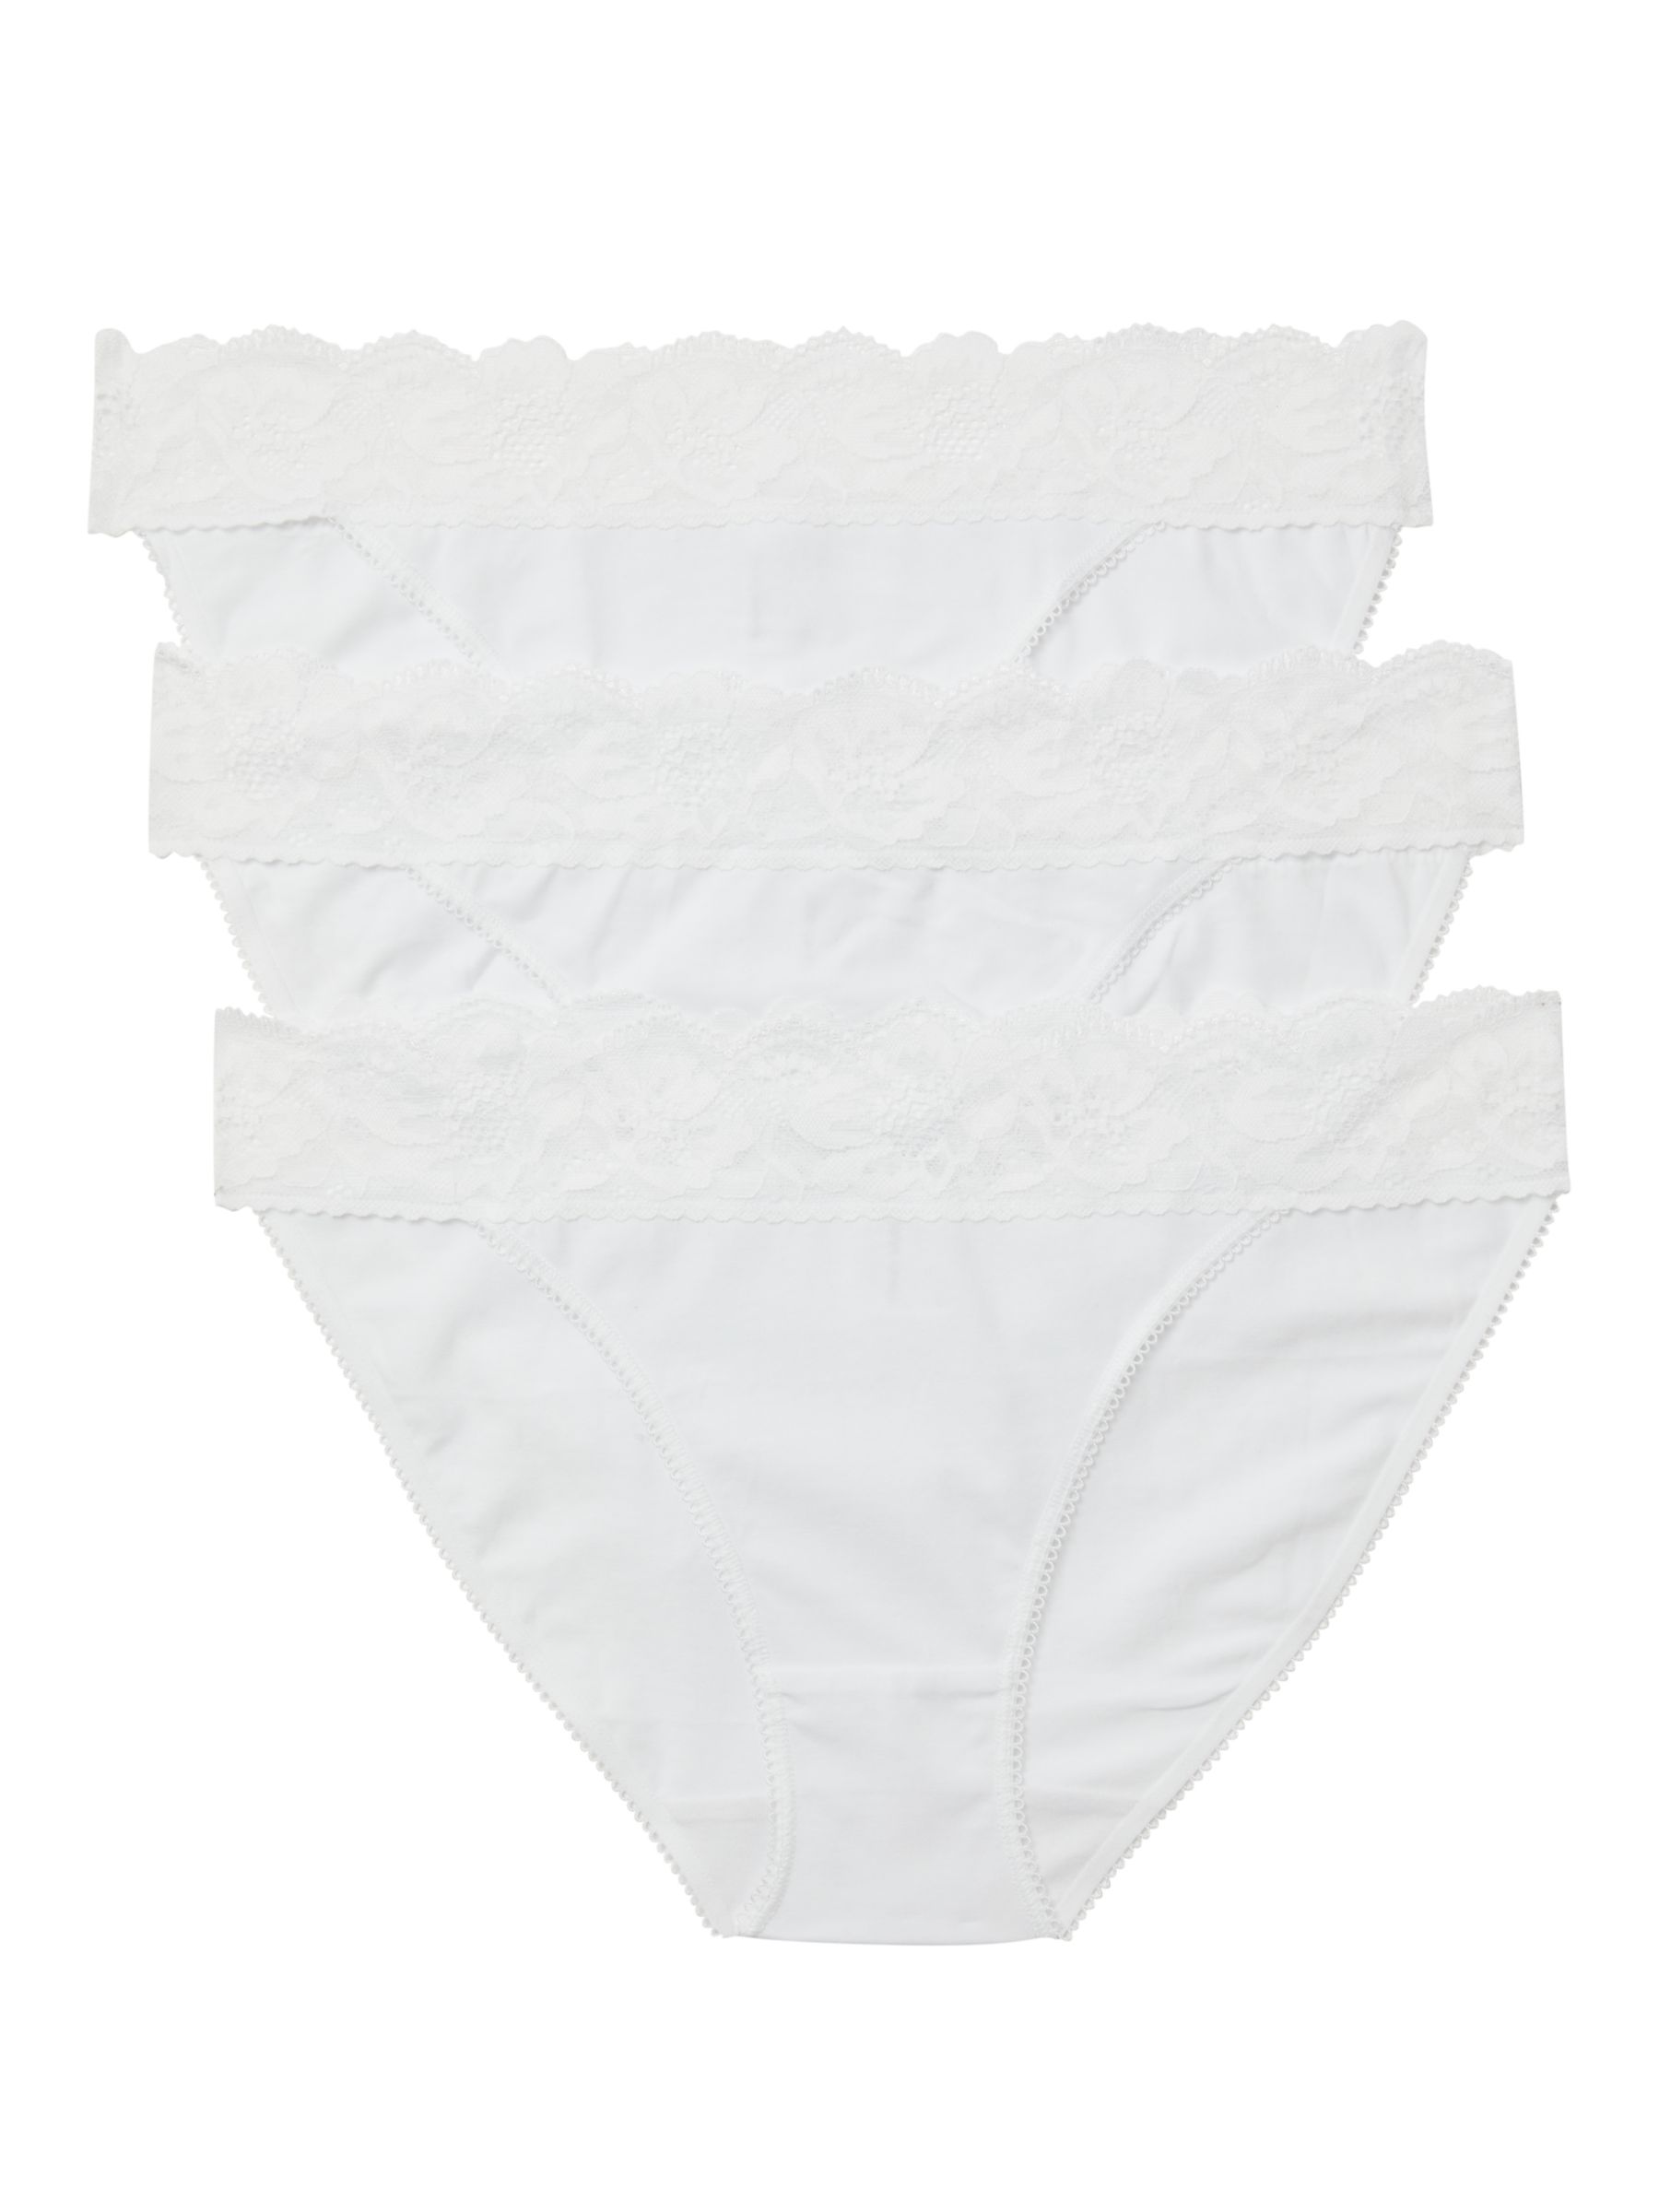 John Lewis ANYDAY Lace Trim Tanga Knickers, Pack of 3, White, 14